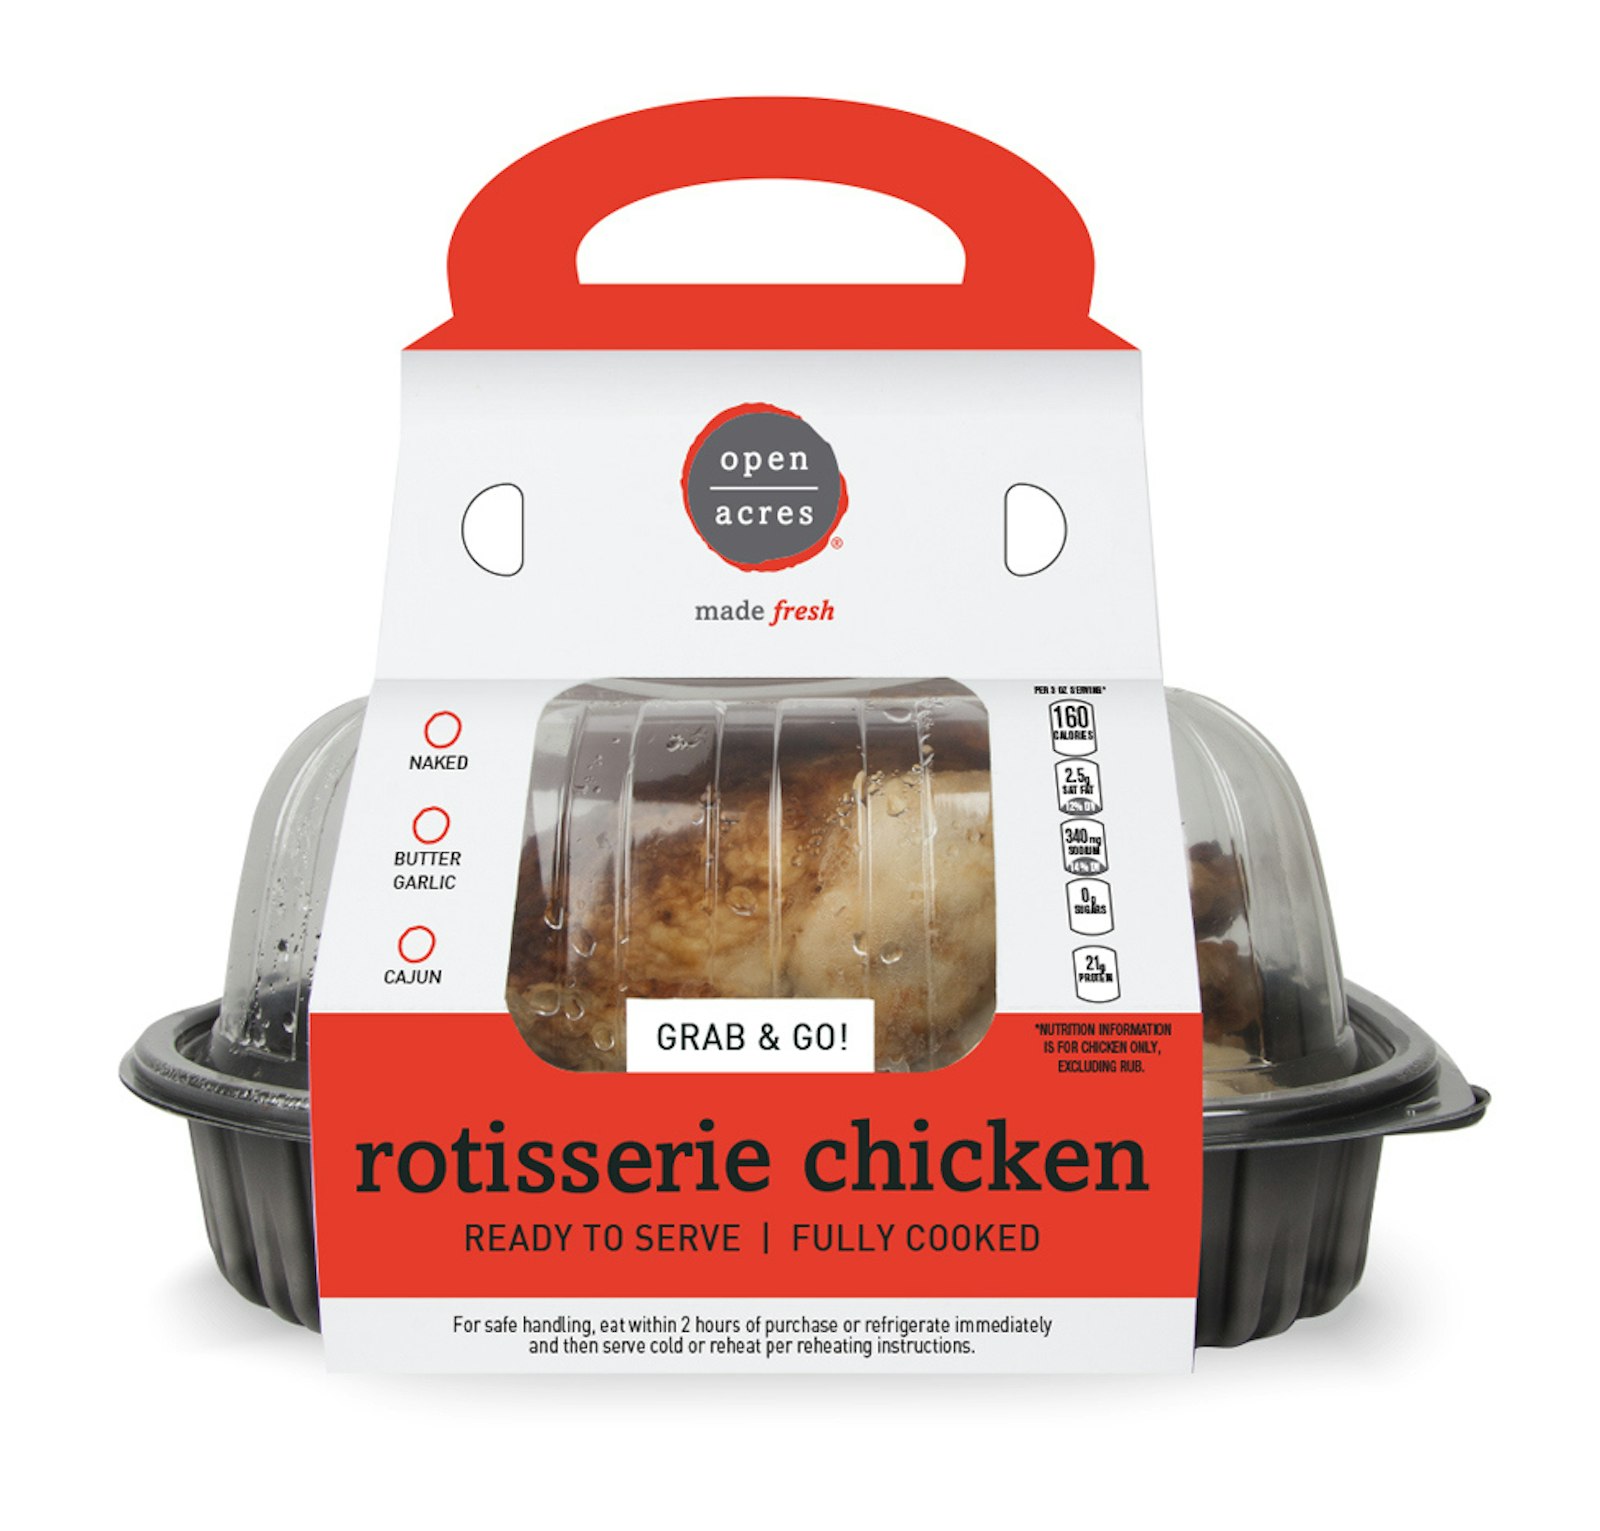 The Open Acres brand packaging design with rotisserie chicken in red package on white background.